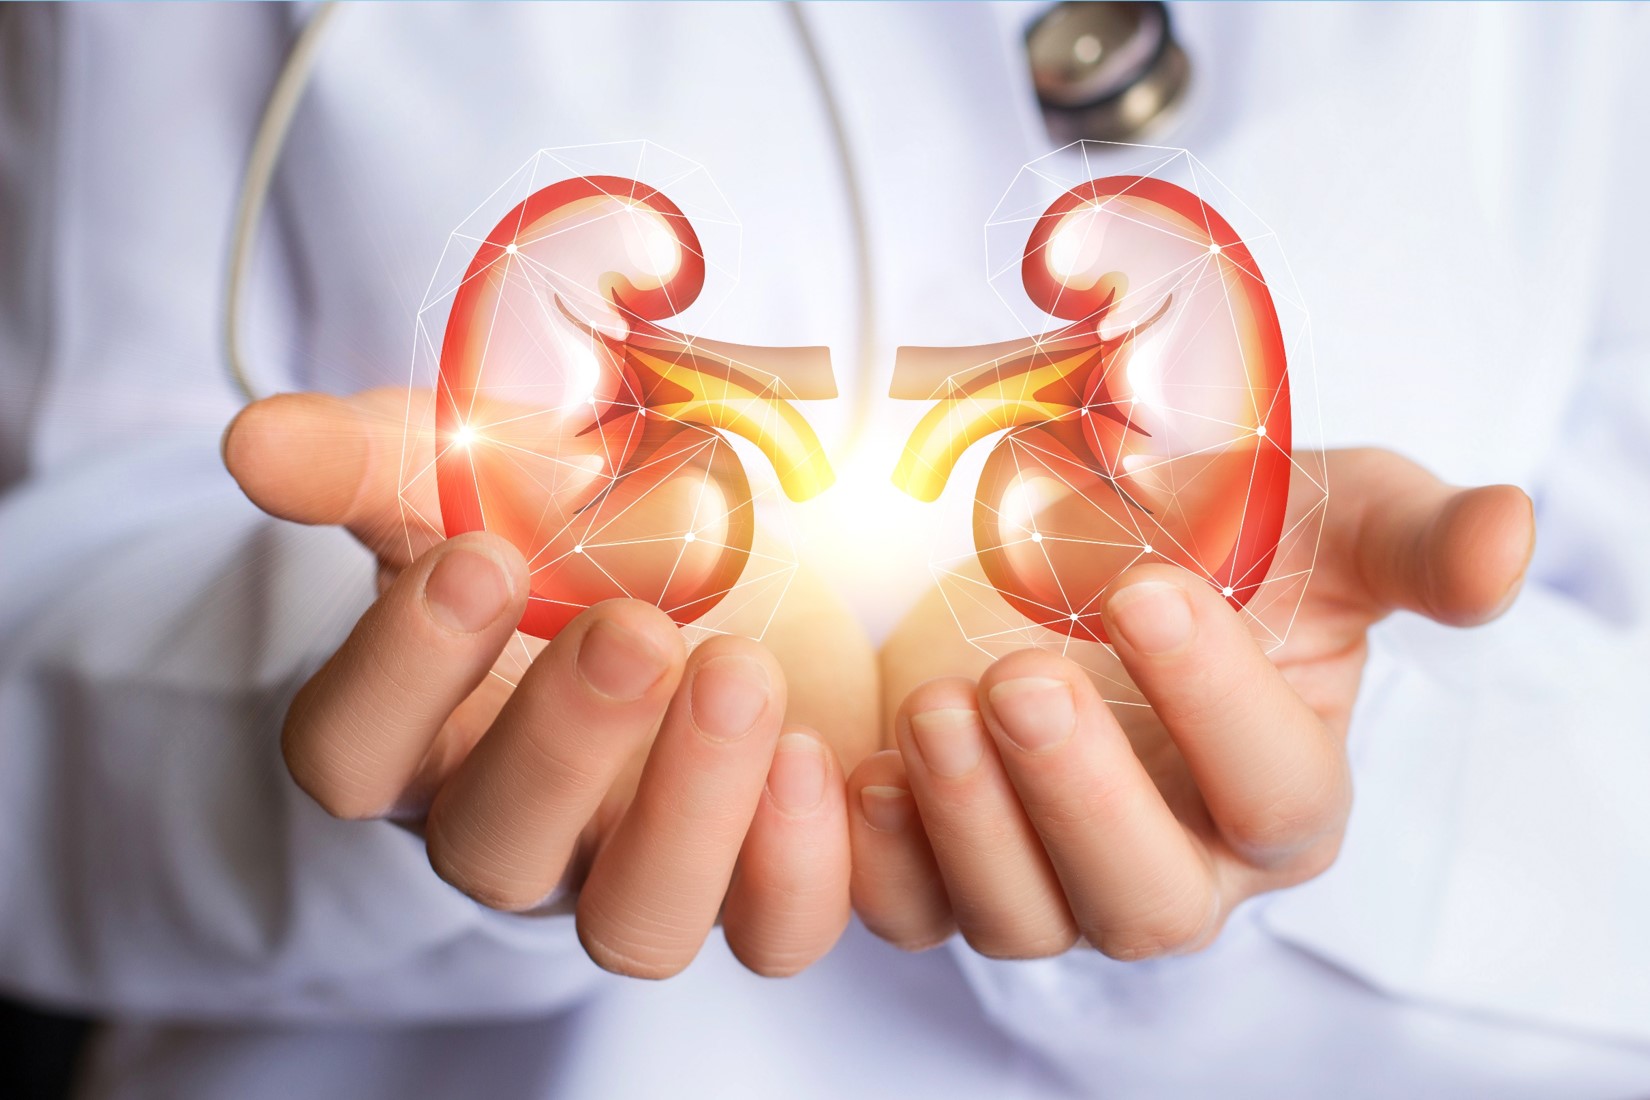 The Self-Regulating Bioartificial Kidney, Part 1: Anatomy of the Device